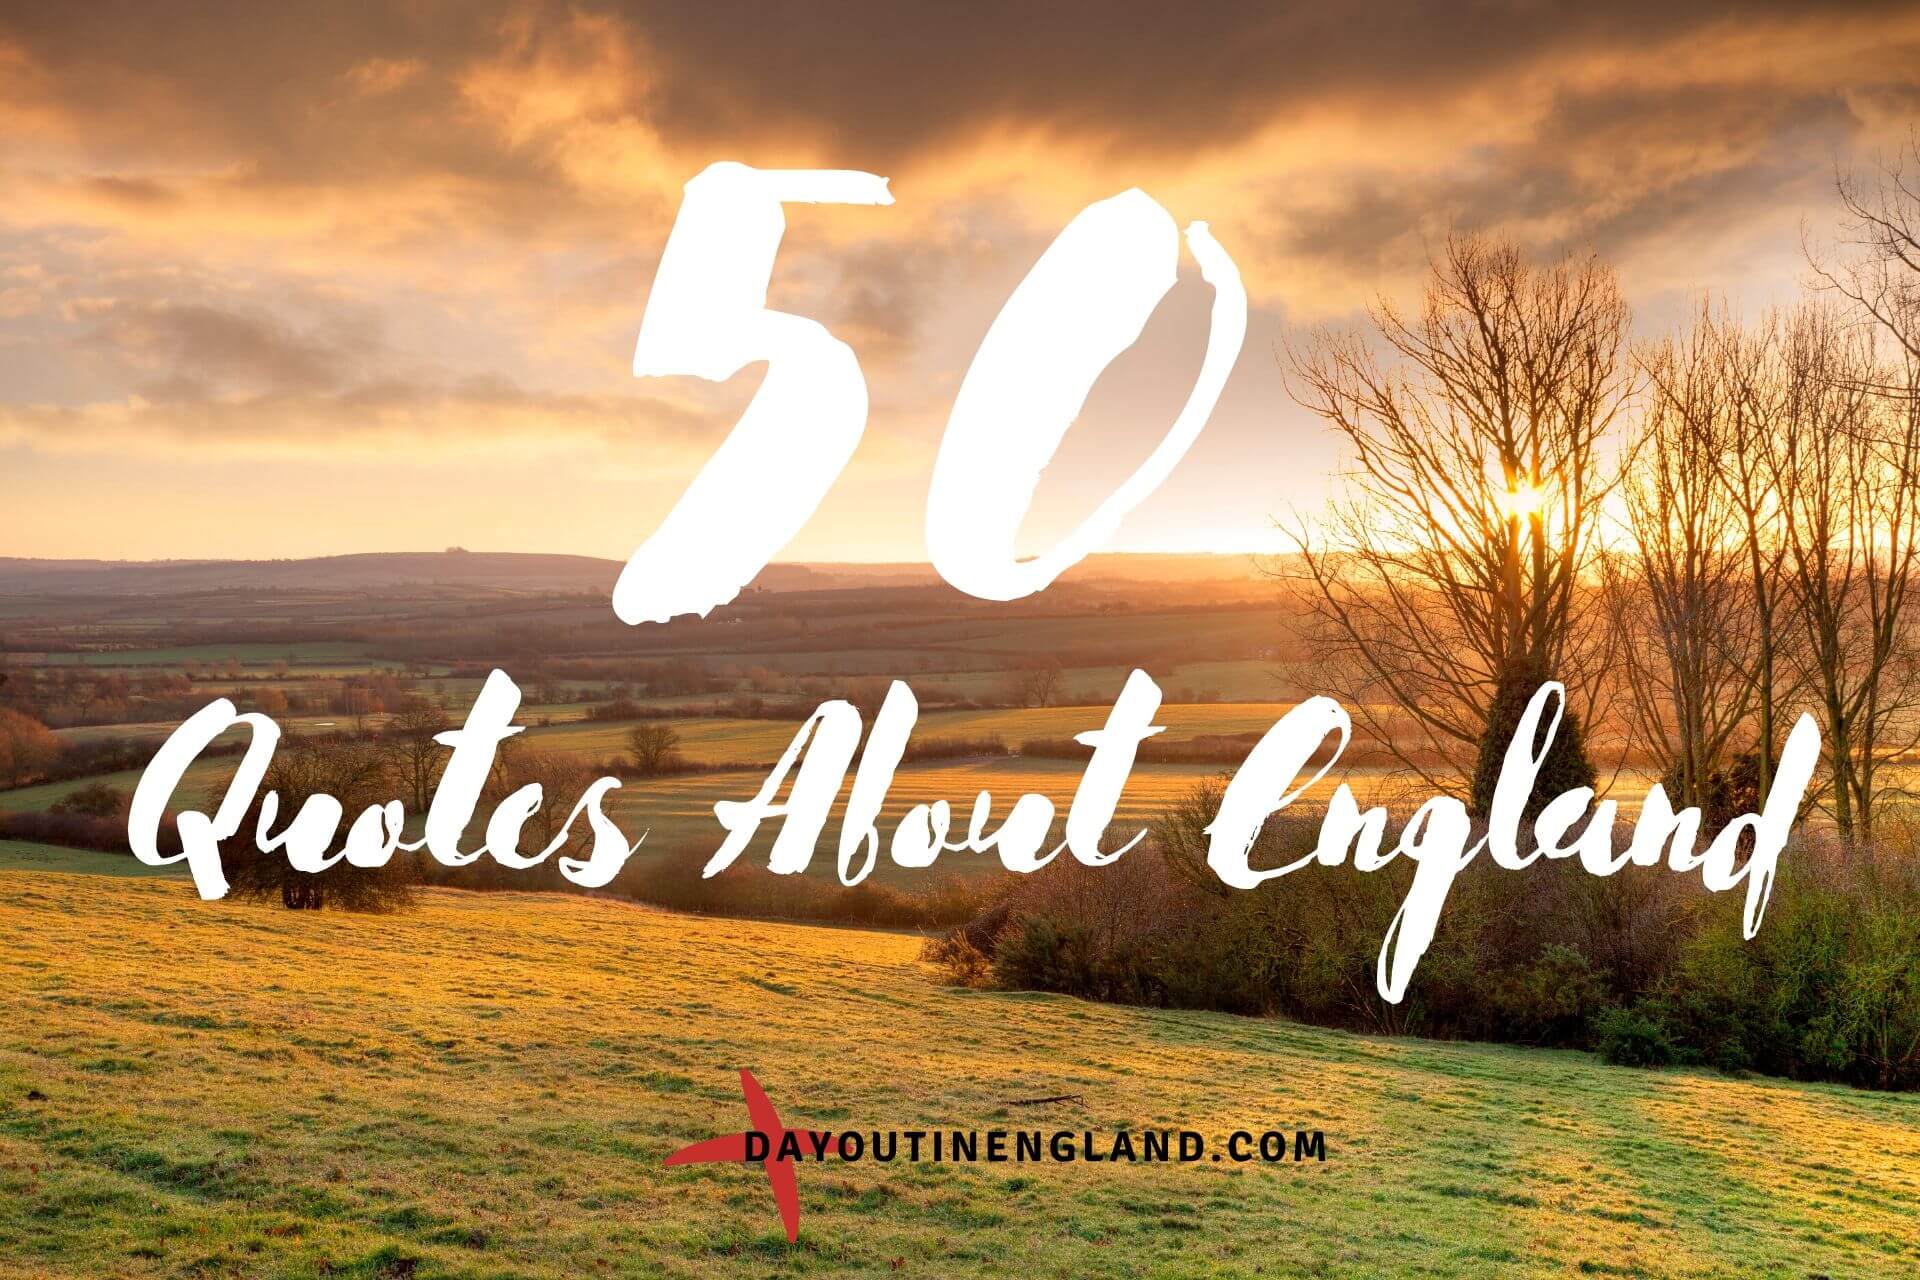 50 Famous Quotes About England You'll Enjoy | Day Out in England